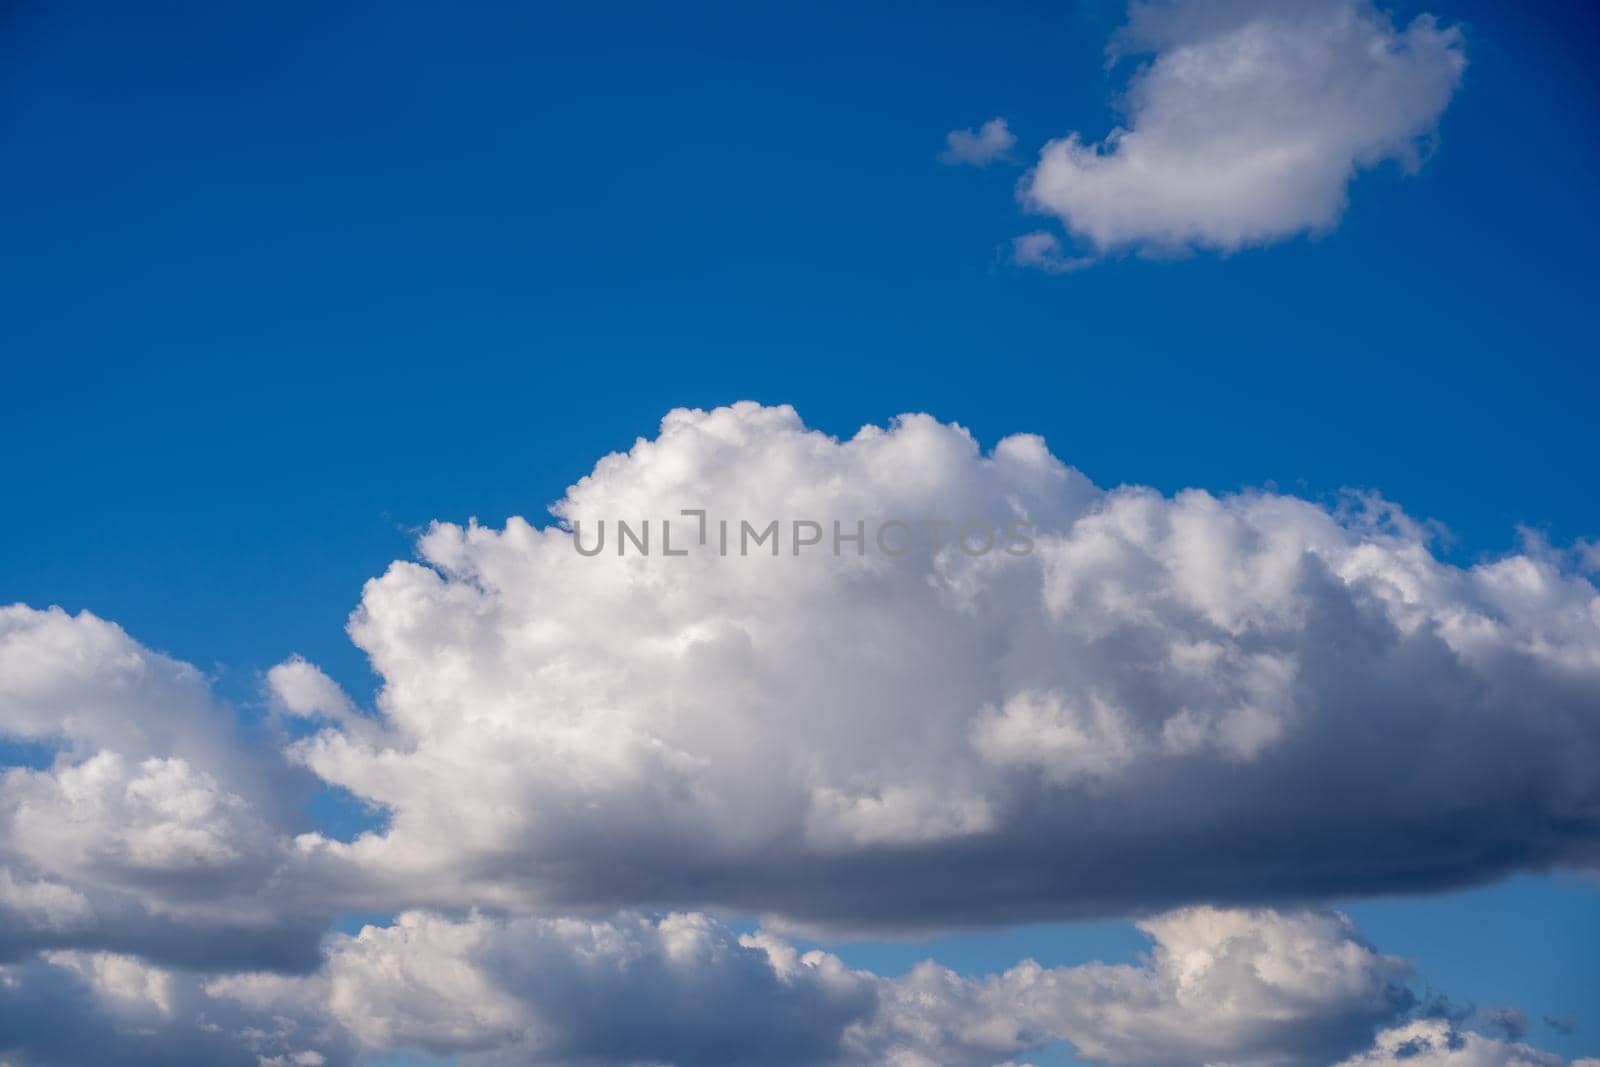 Beautiful blue sky with fluffy white clouds. Wonderful summer or spring day with clear sky and white clouds.